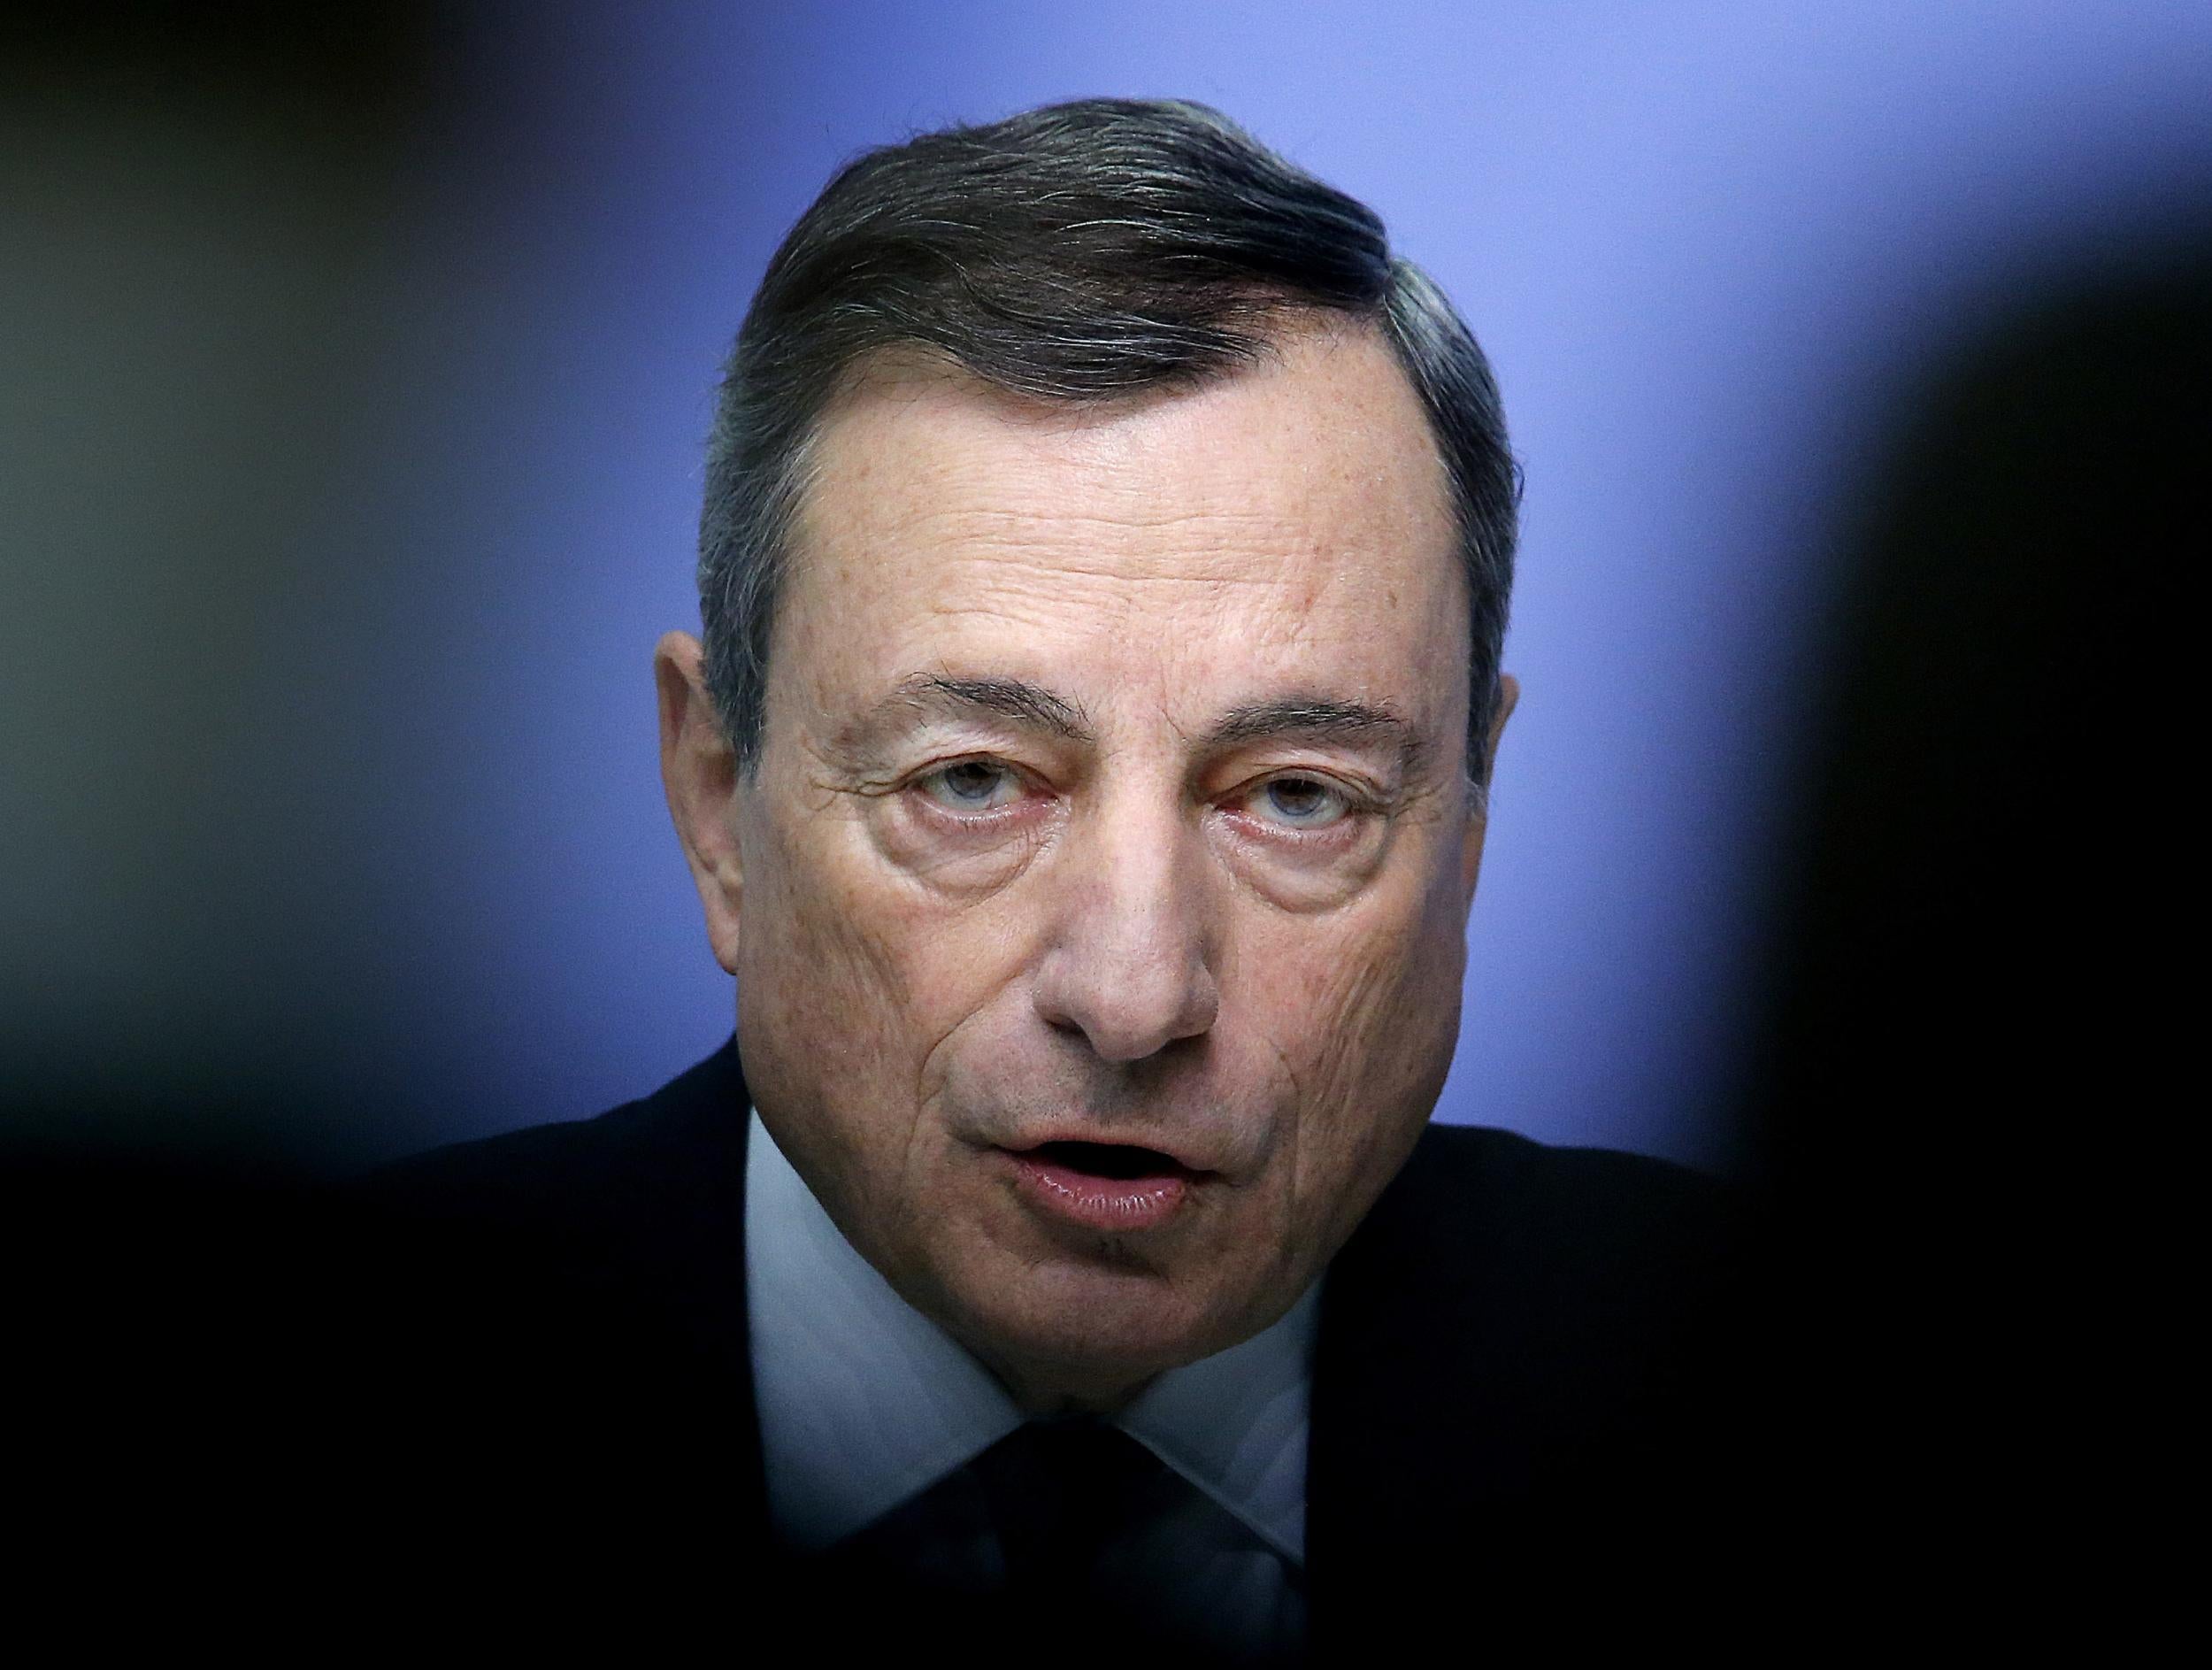 'The latest data and survey results point to solid and broad-based growth momentum,' said ECB president Mario Draghi